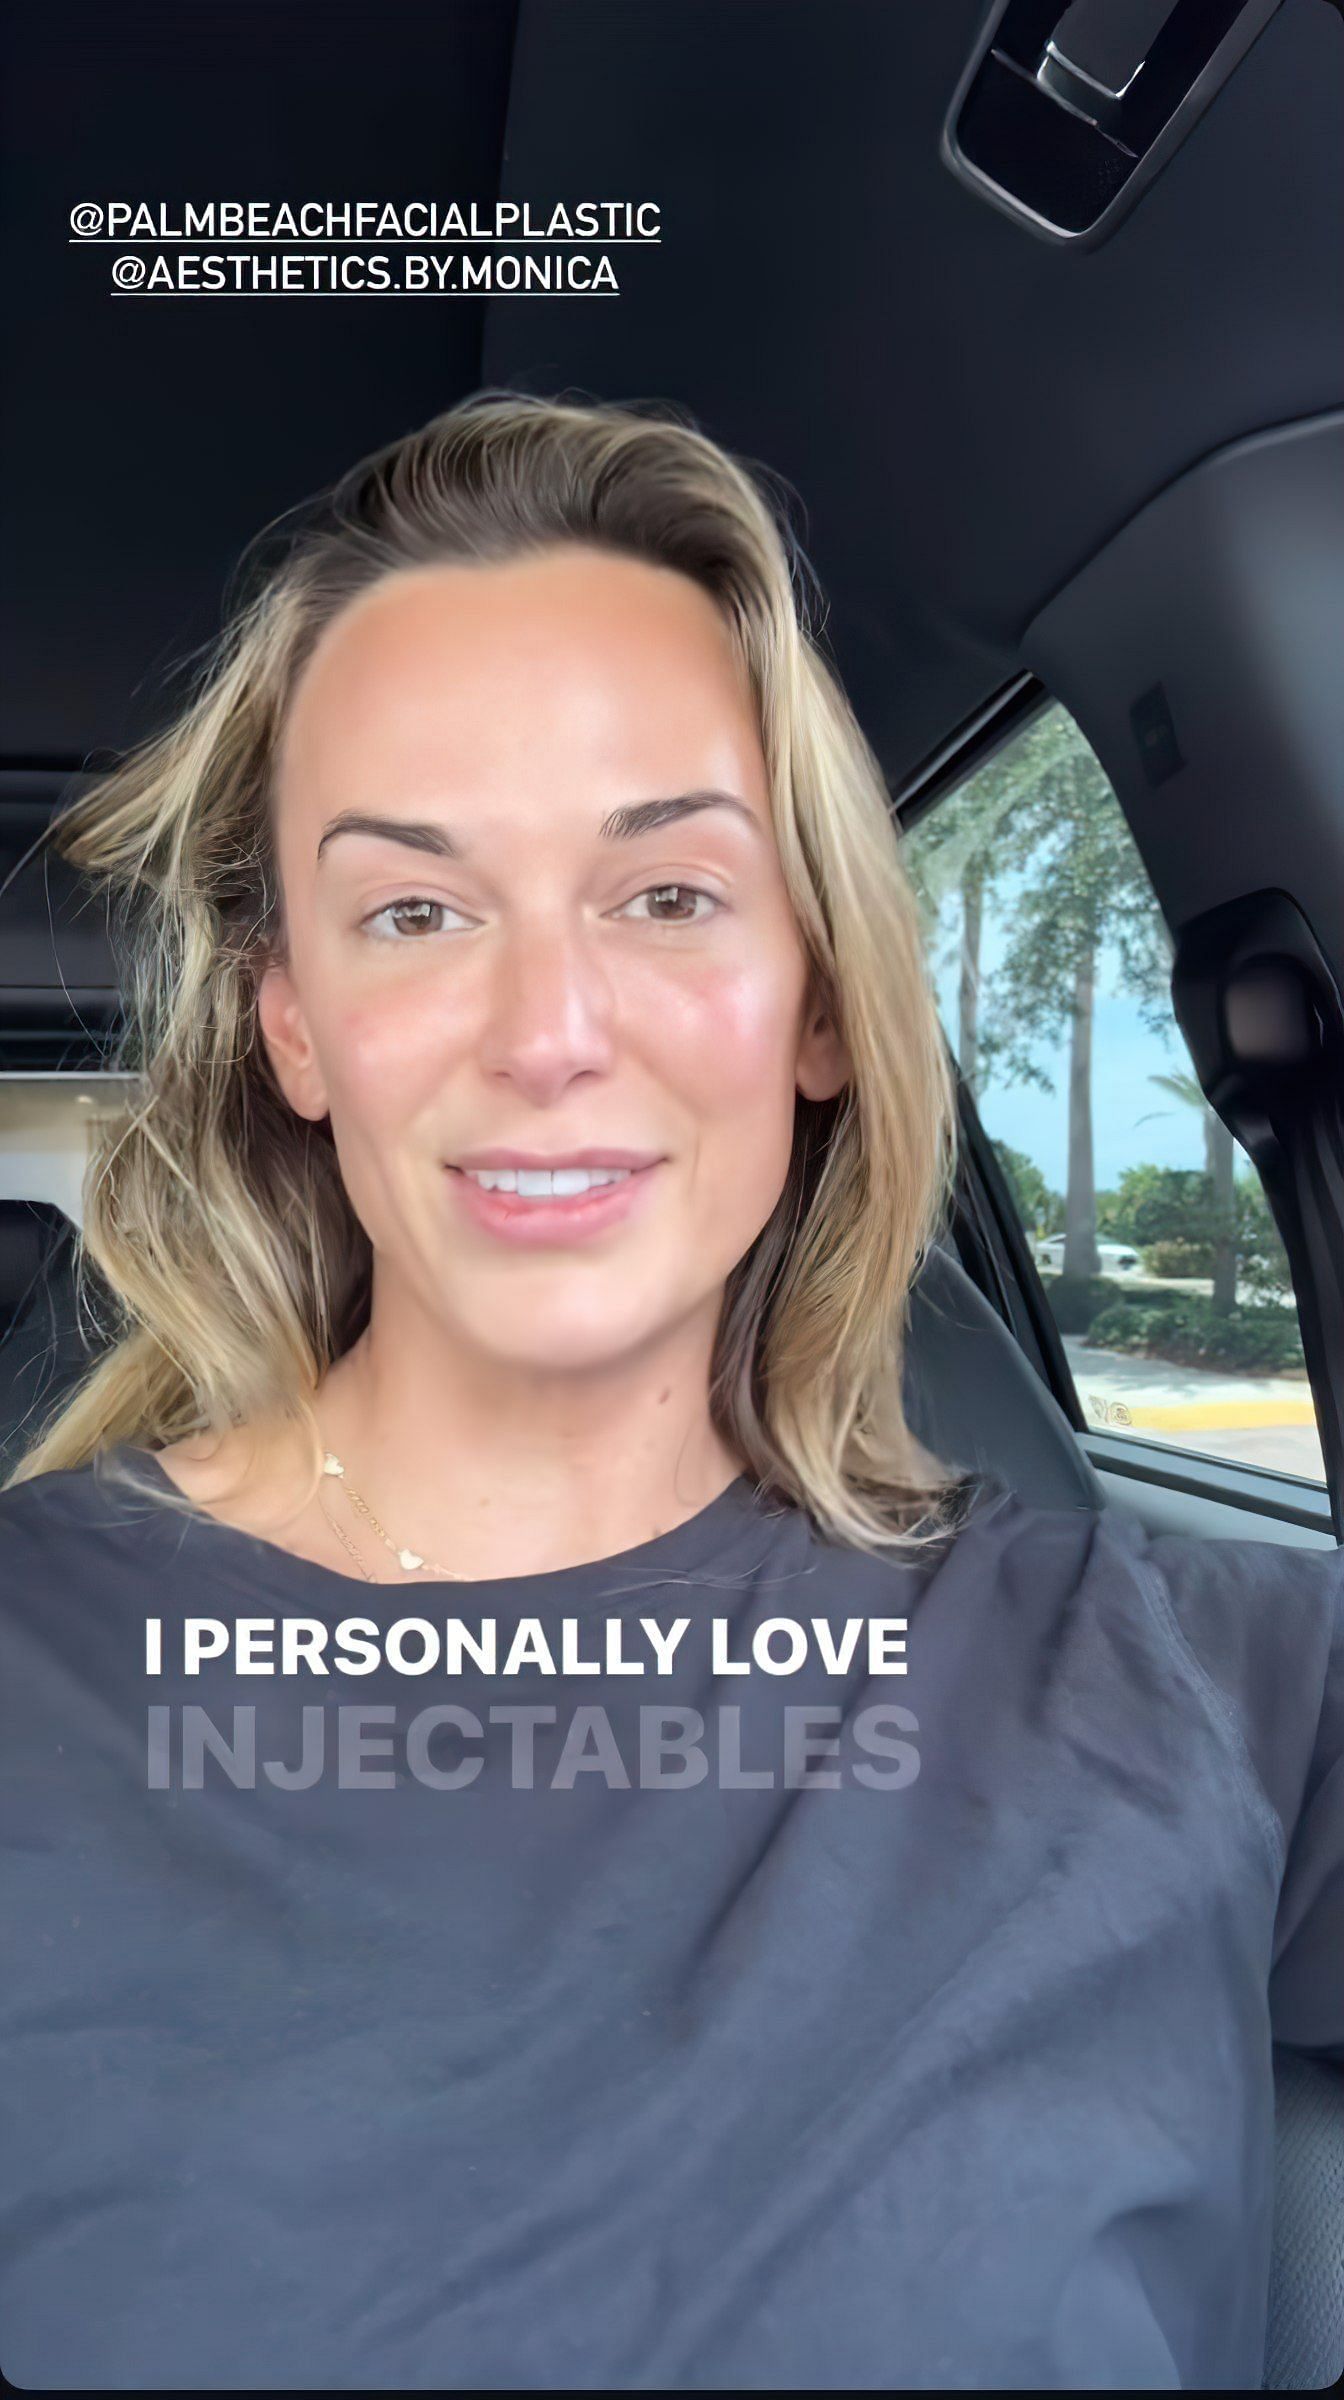 Jena Sims gets Botox with injectables and shares her experience on Instagram. Image via @jenasims